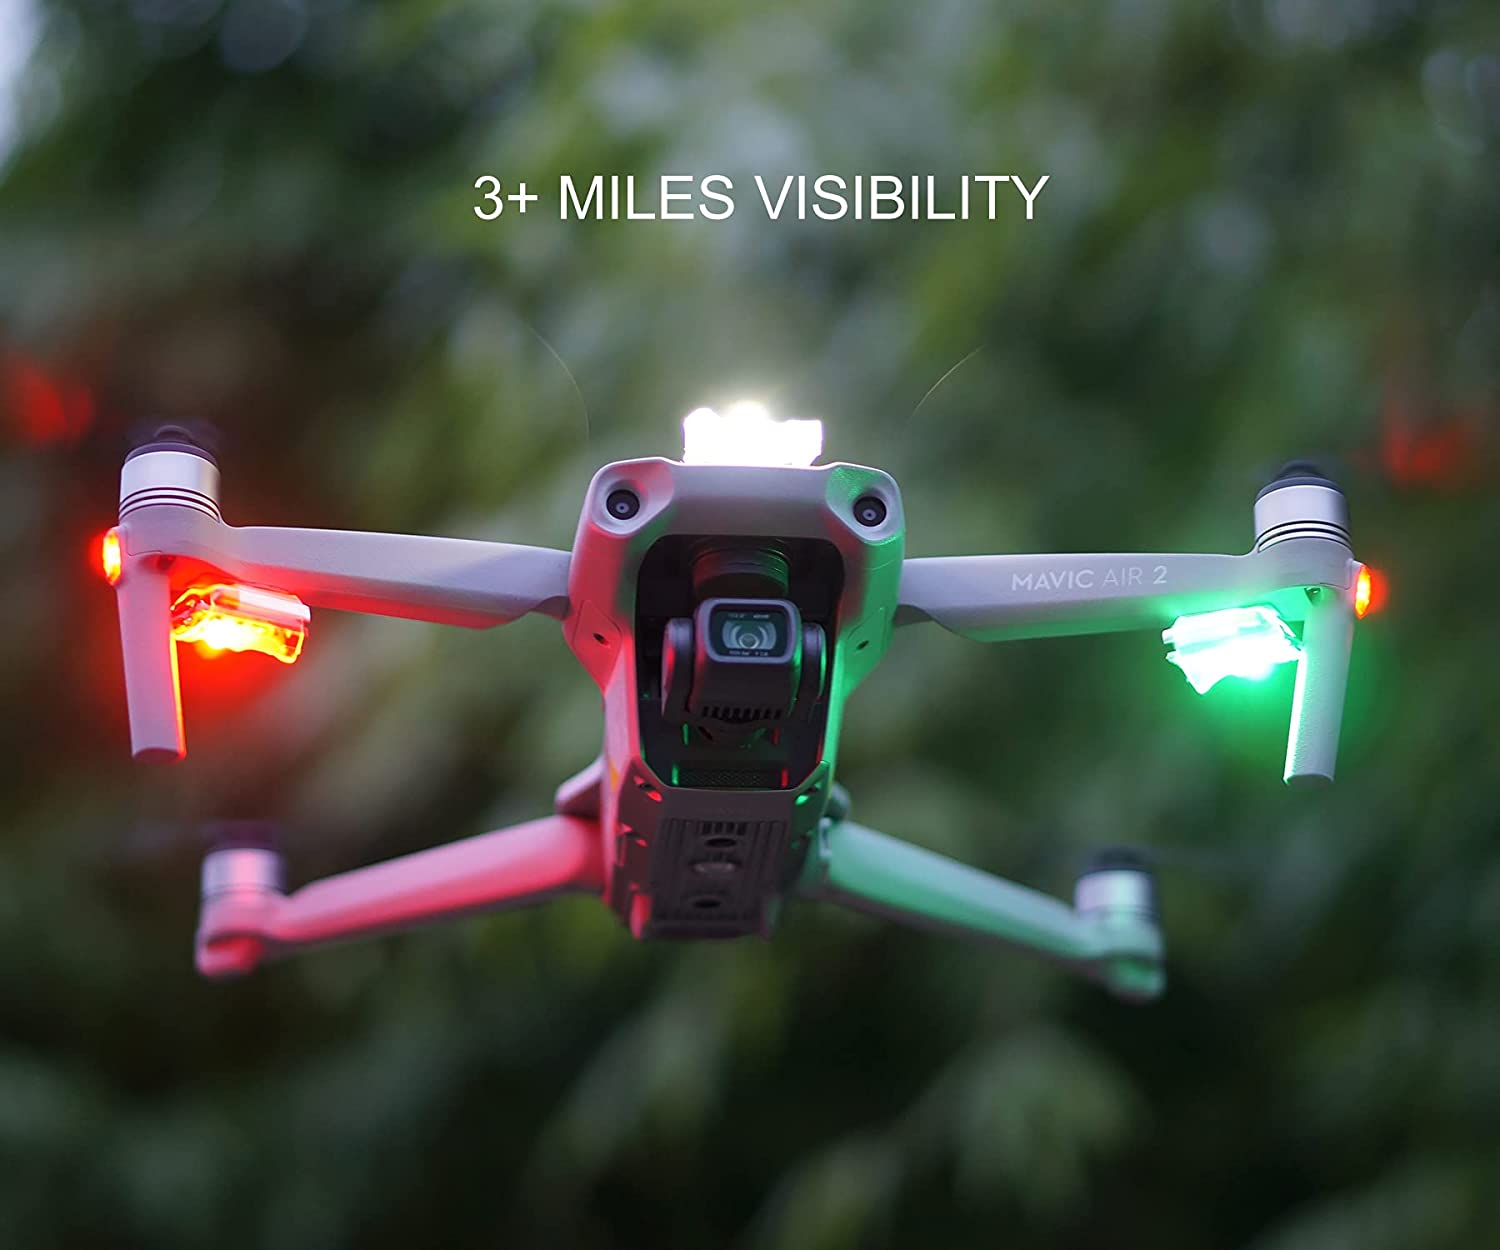 VIFLY Drone Strobe, anti-collision light for FAA drone night flying